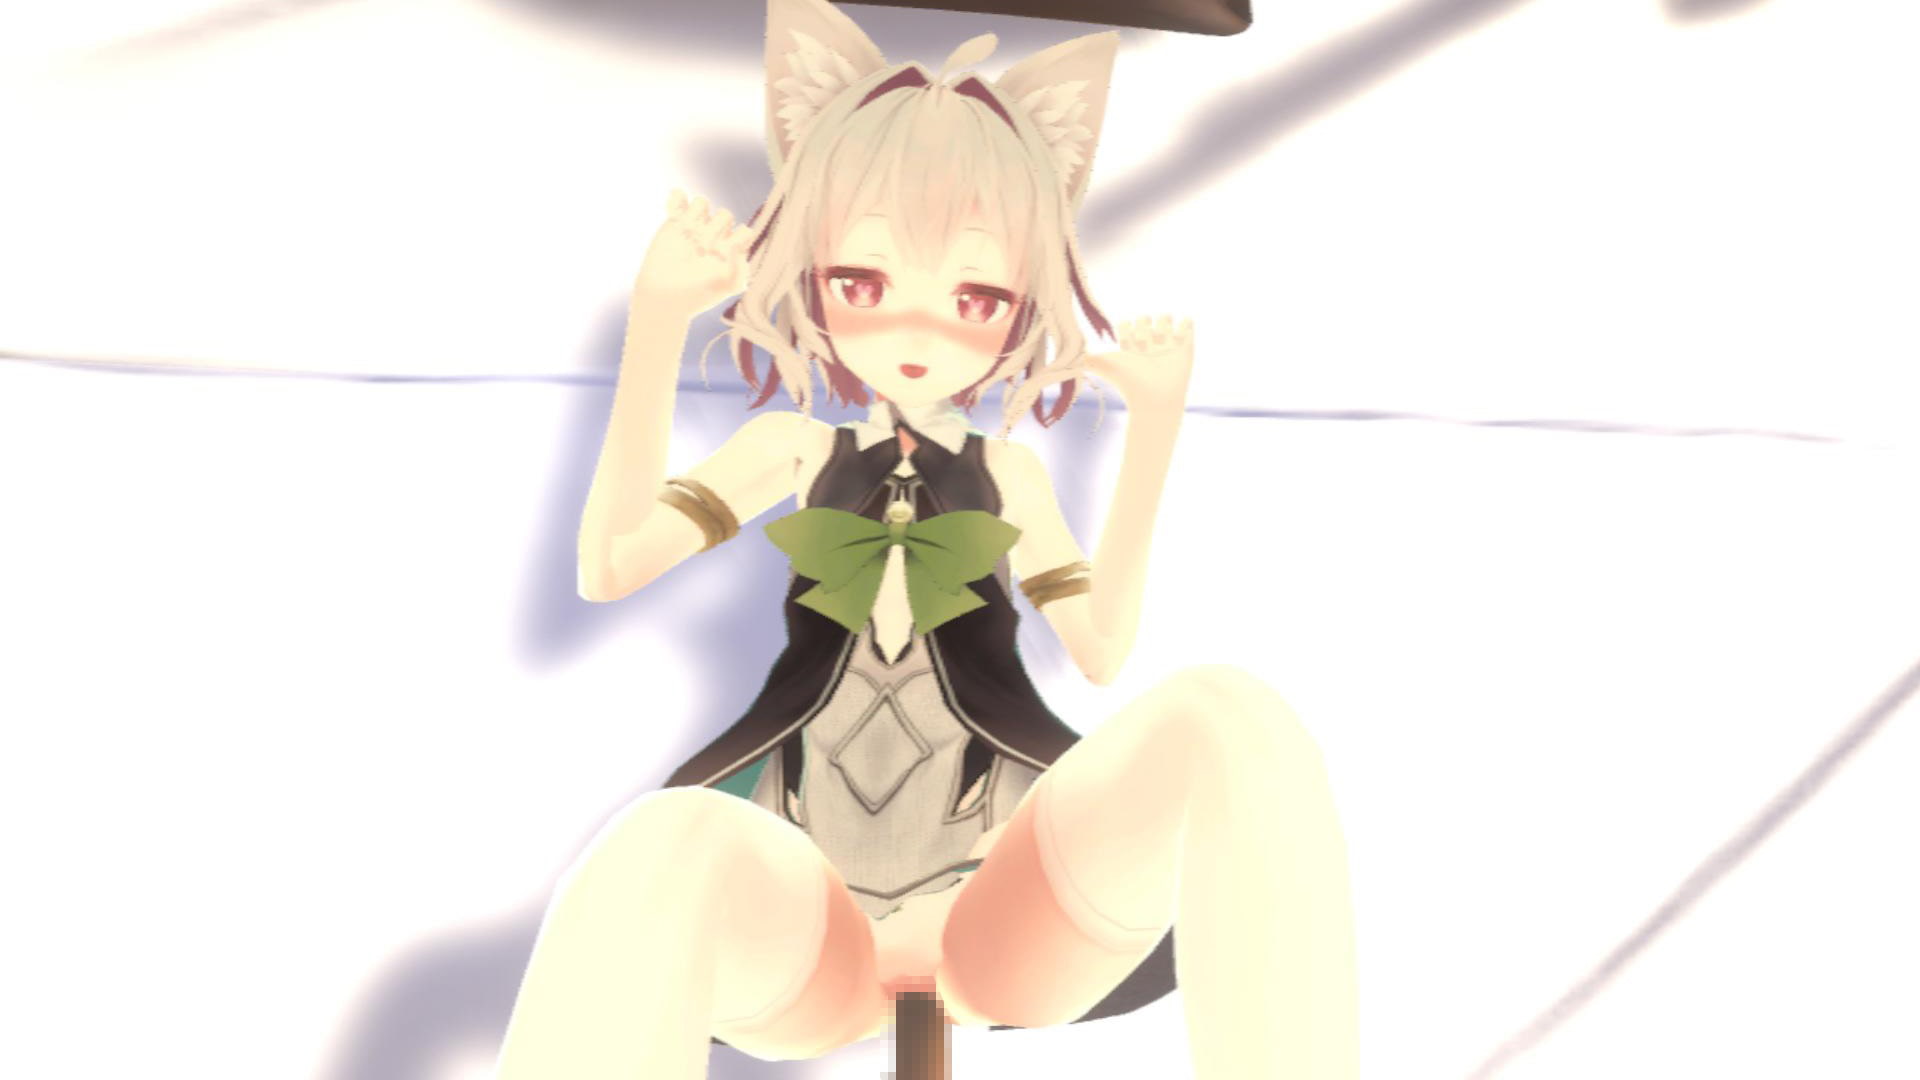 Love and sex with cute girls VR